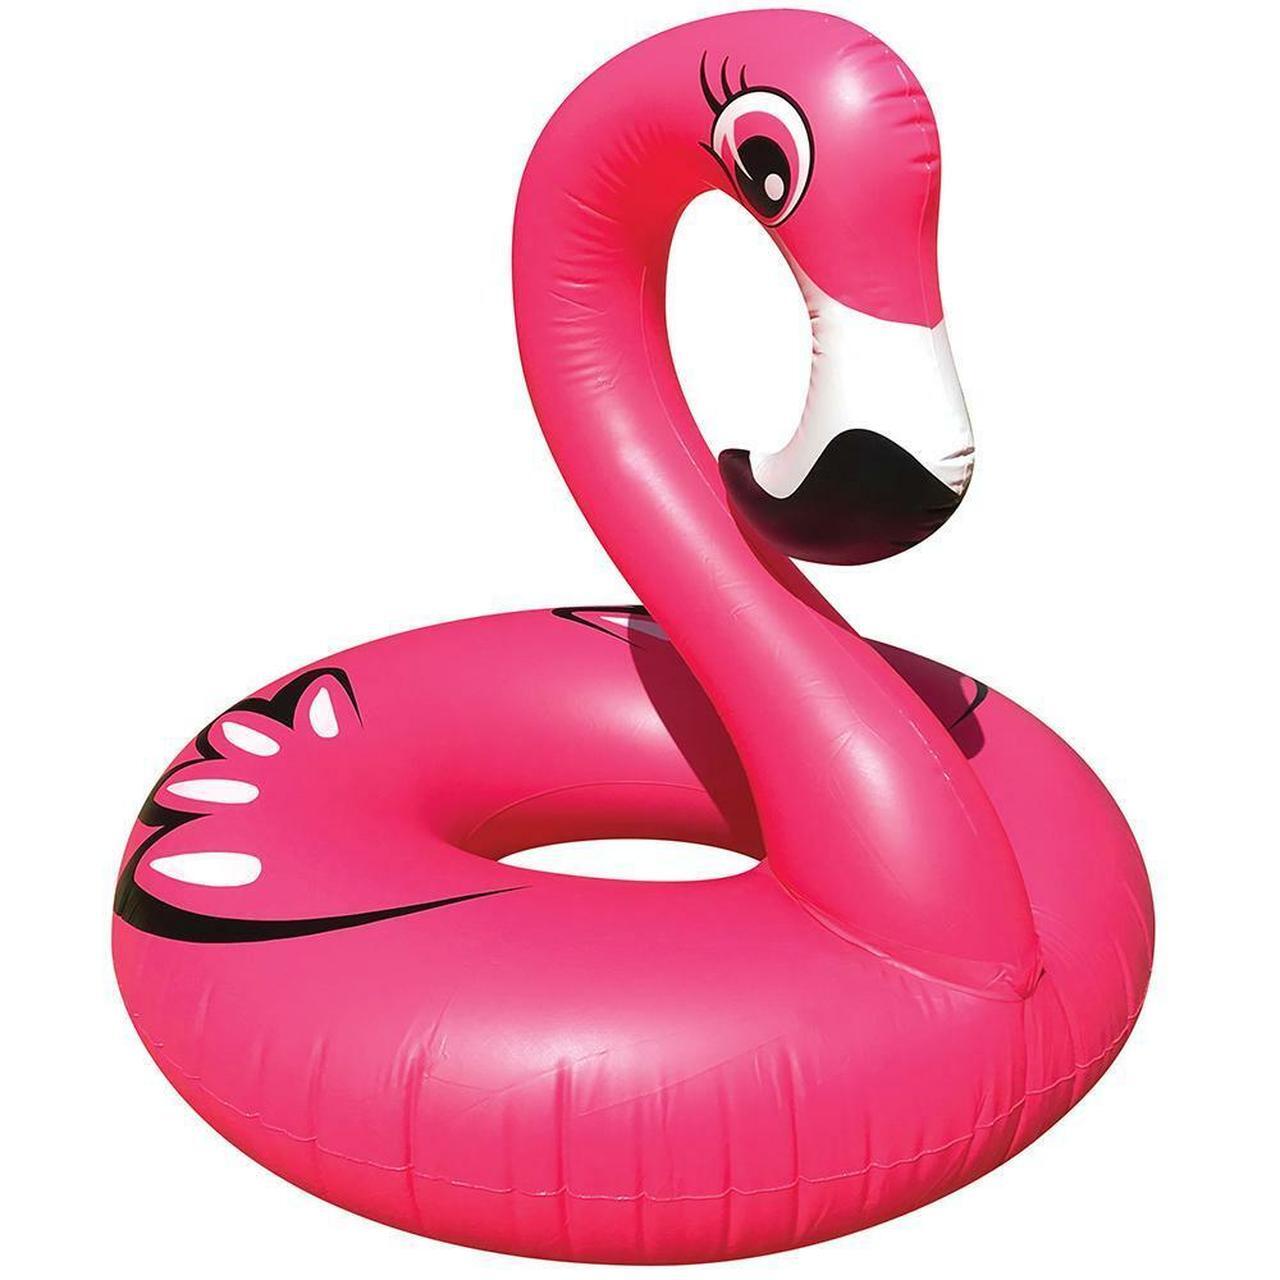 Palm Beach Flamingo Inflateable Pool Toy - 751203048100